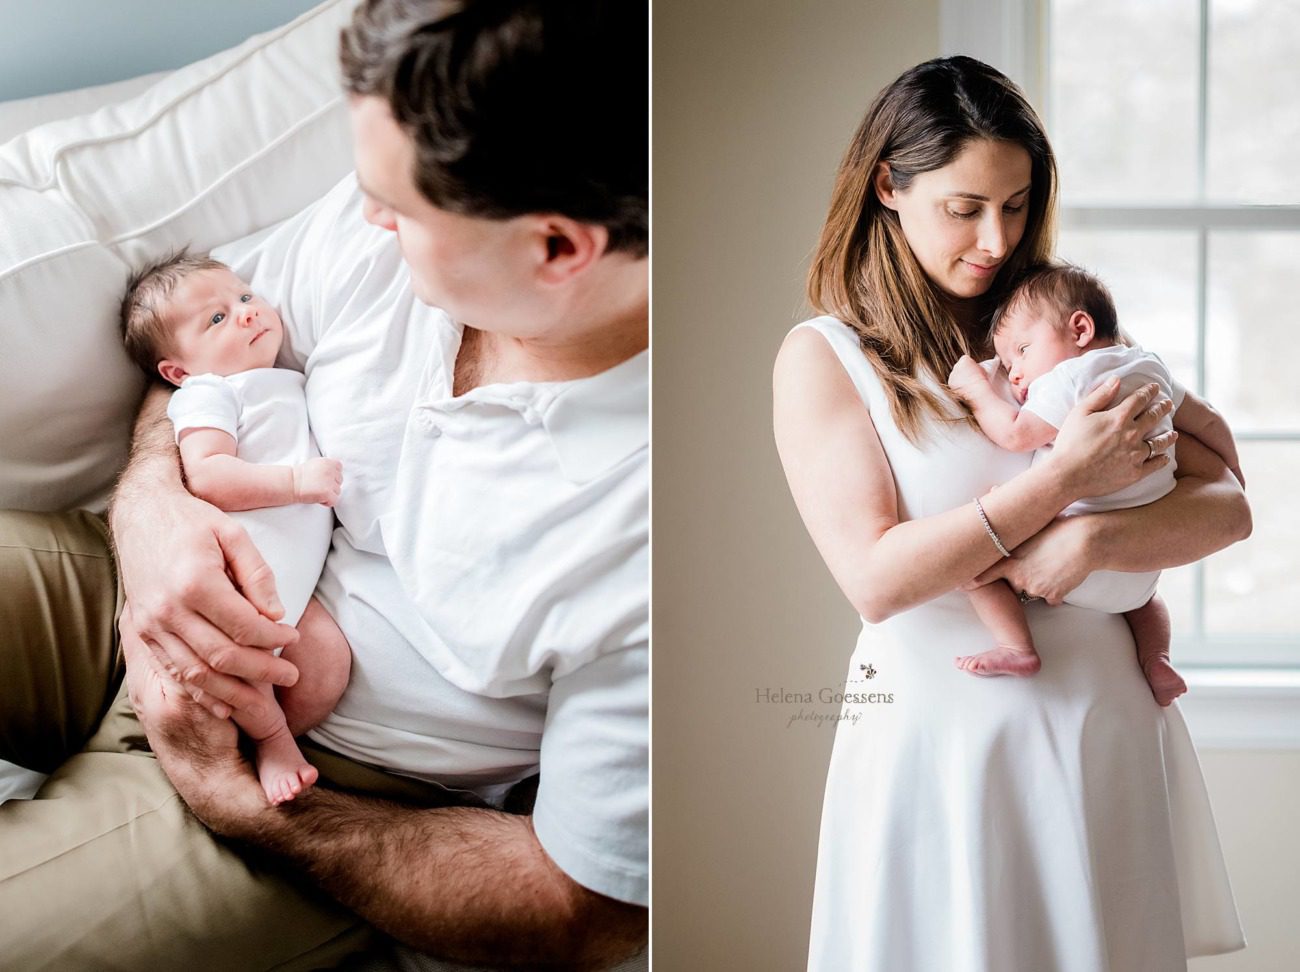 newborn session with Helena Goessens Photography in Needham MA